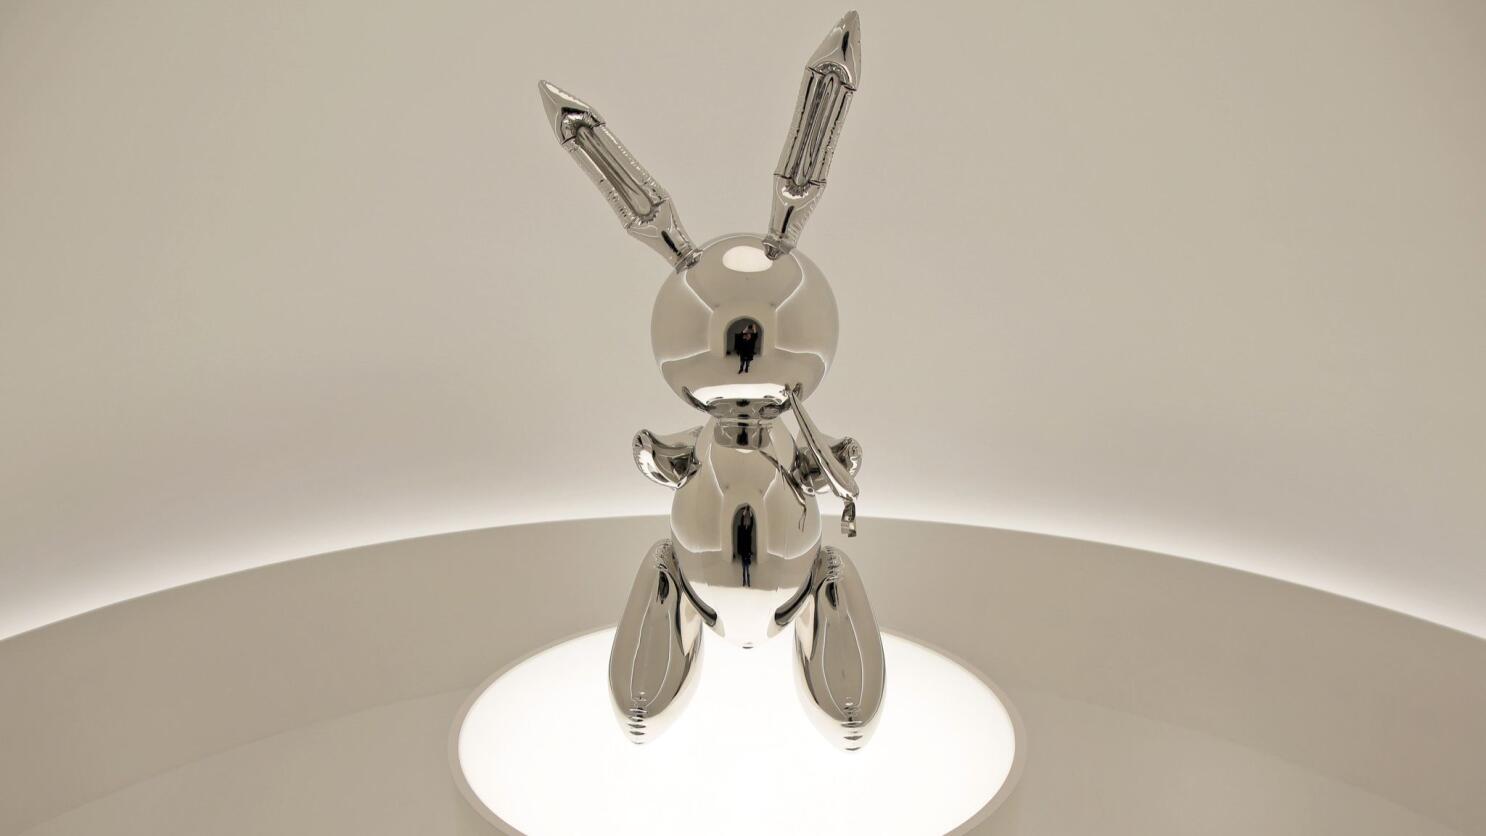 Why Jeff Koons's “Rabbit” Could Sell for up to $70 Million